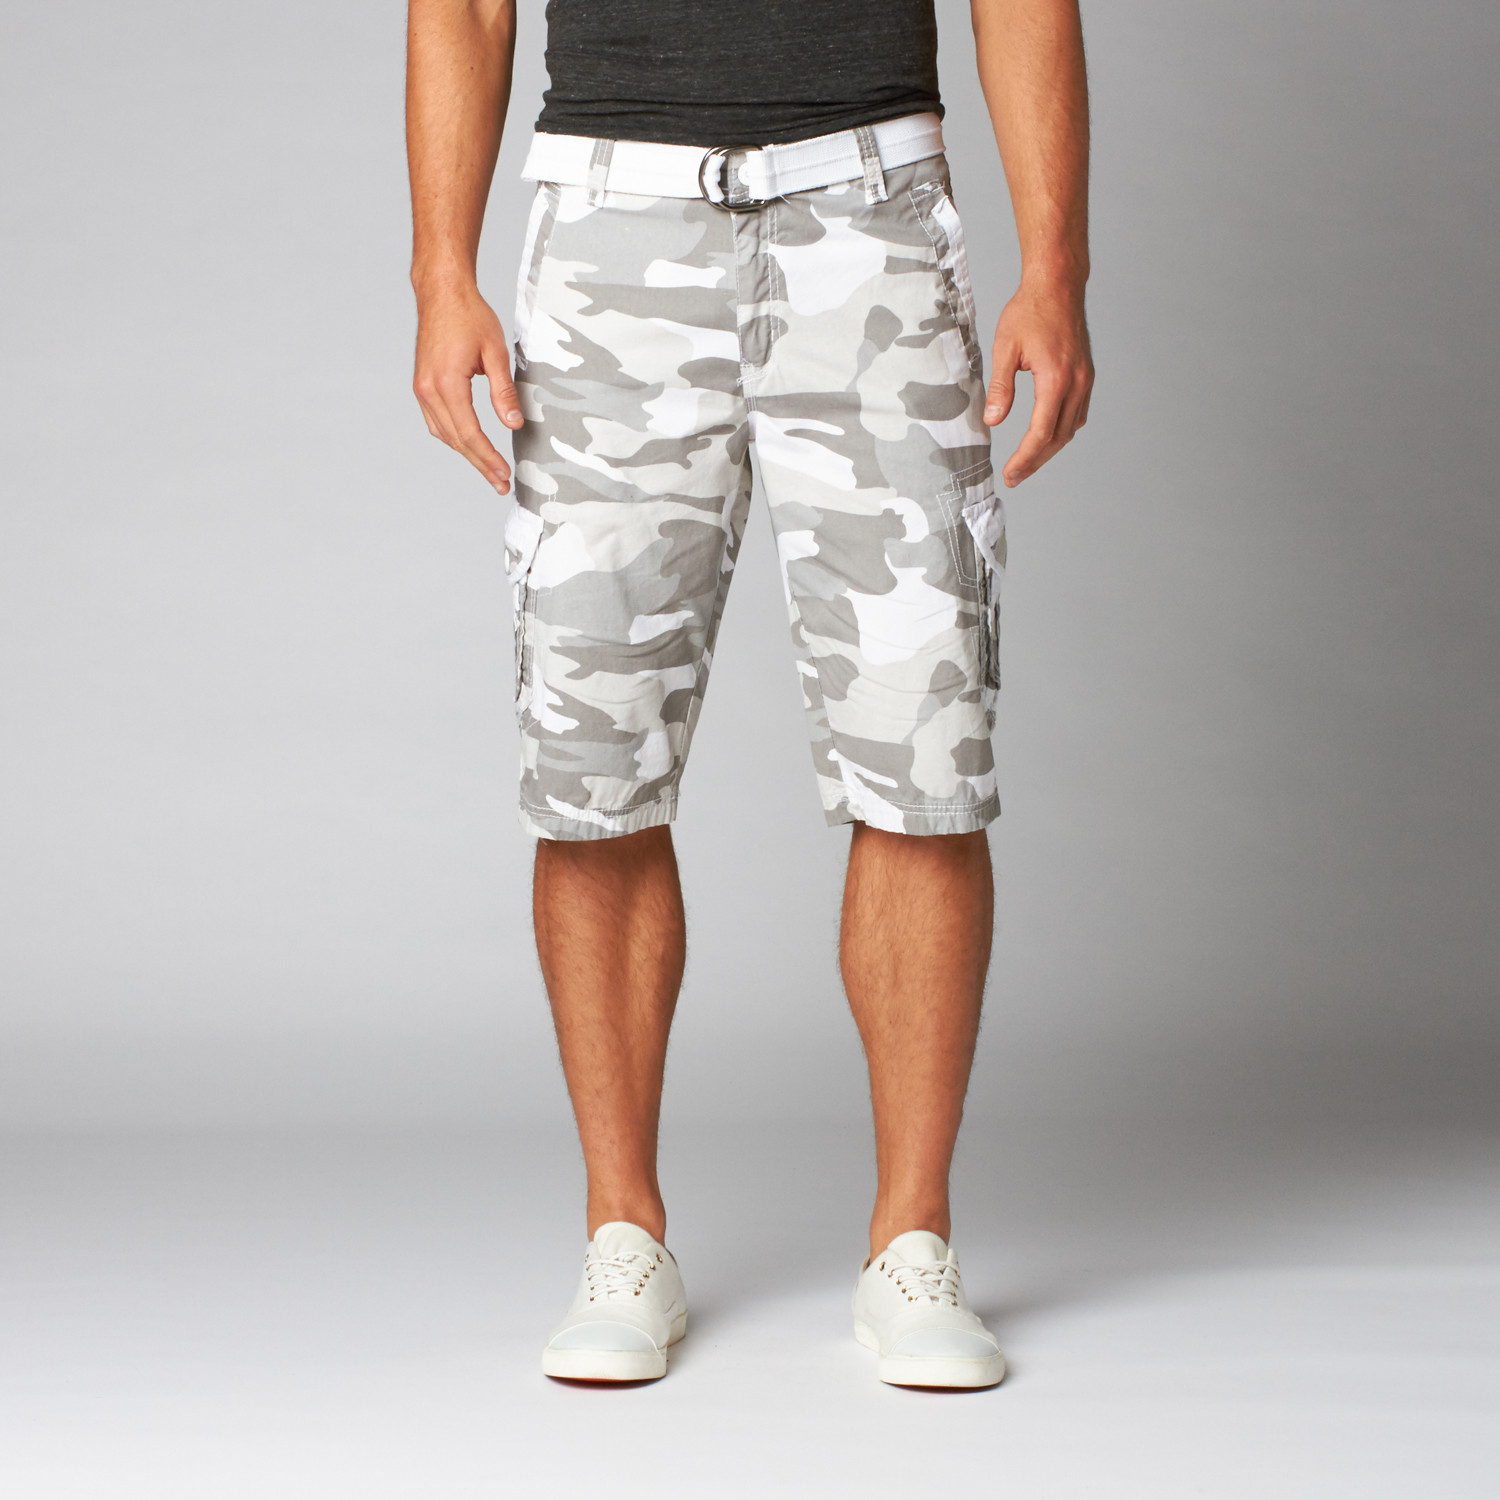 What To Wear With Camo Cargo Shorts For Women